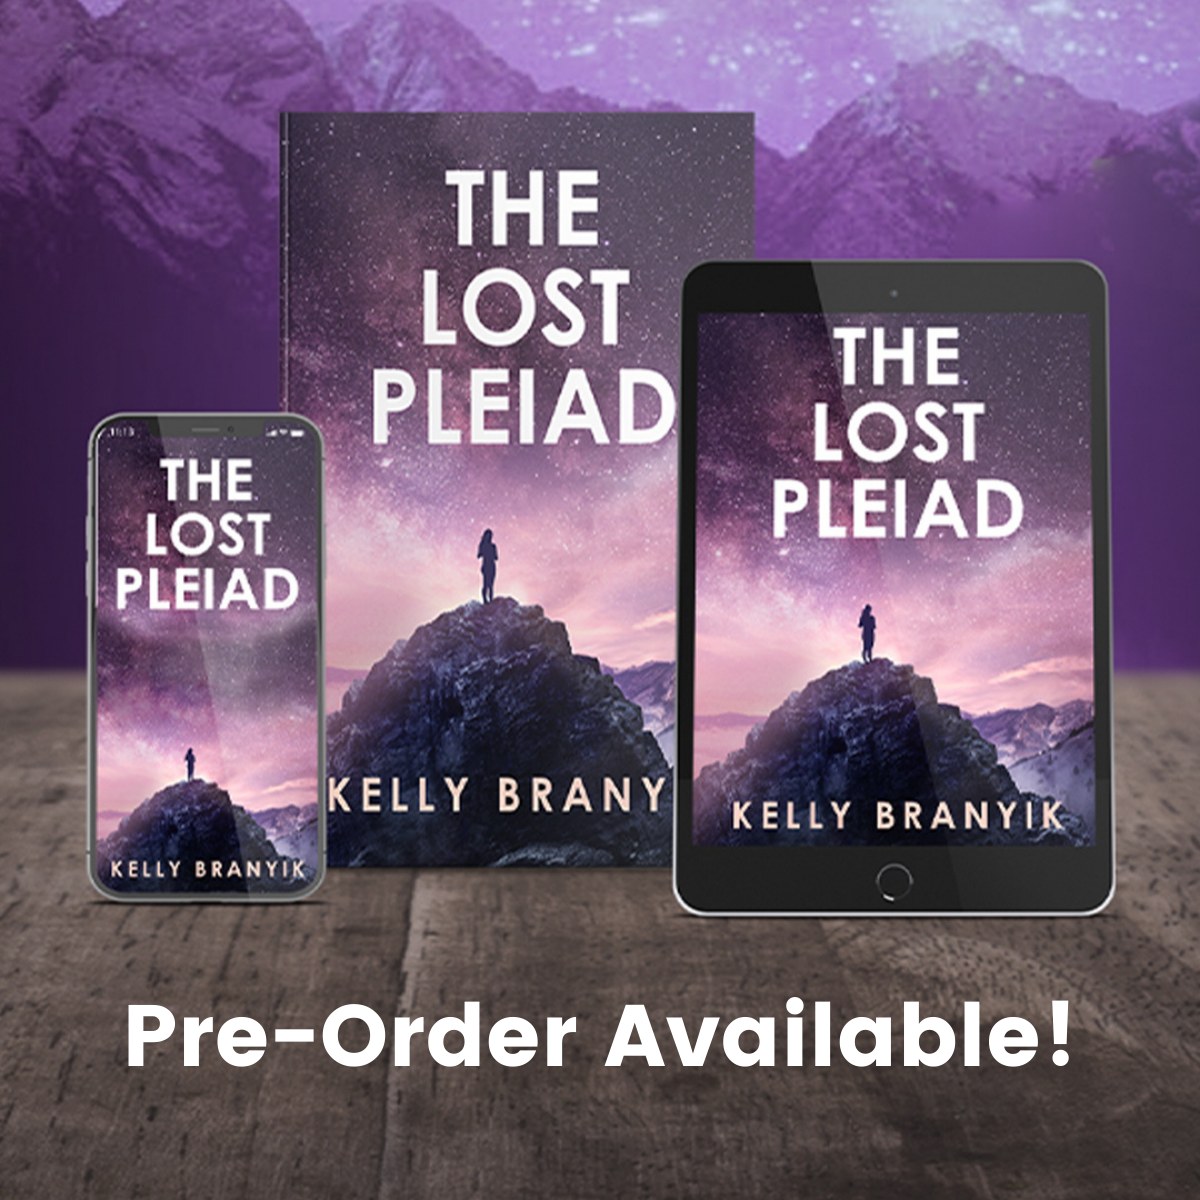 Indie Book, The Lost Pleiad, is Available for Pre-Order on Indiegogo